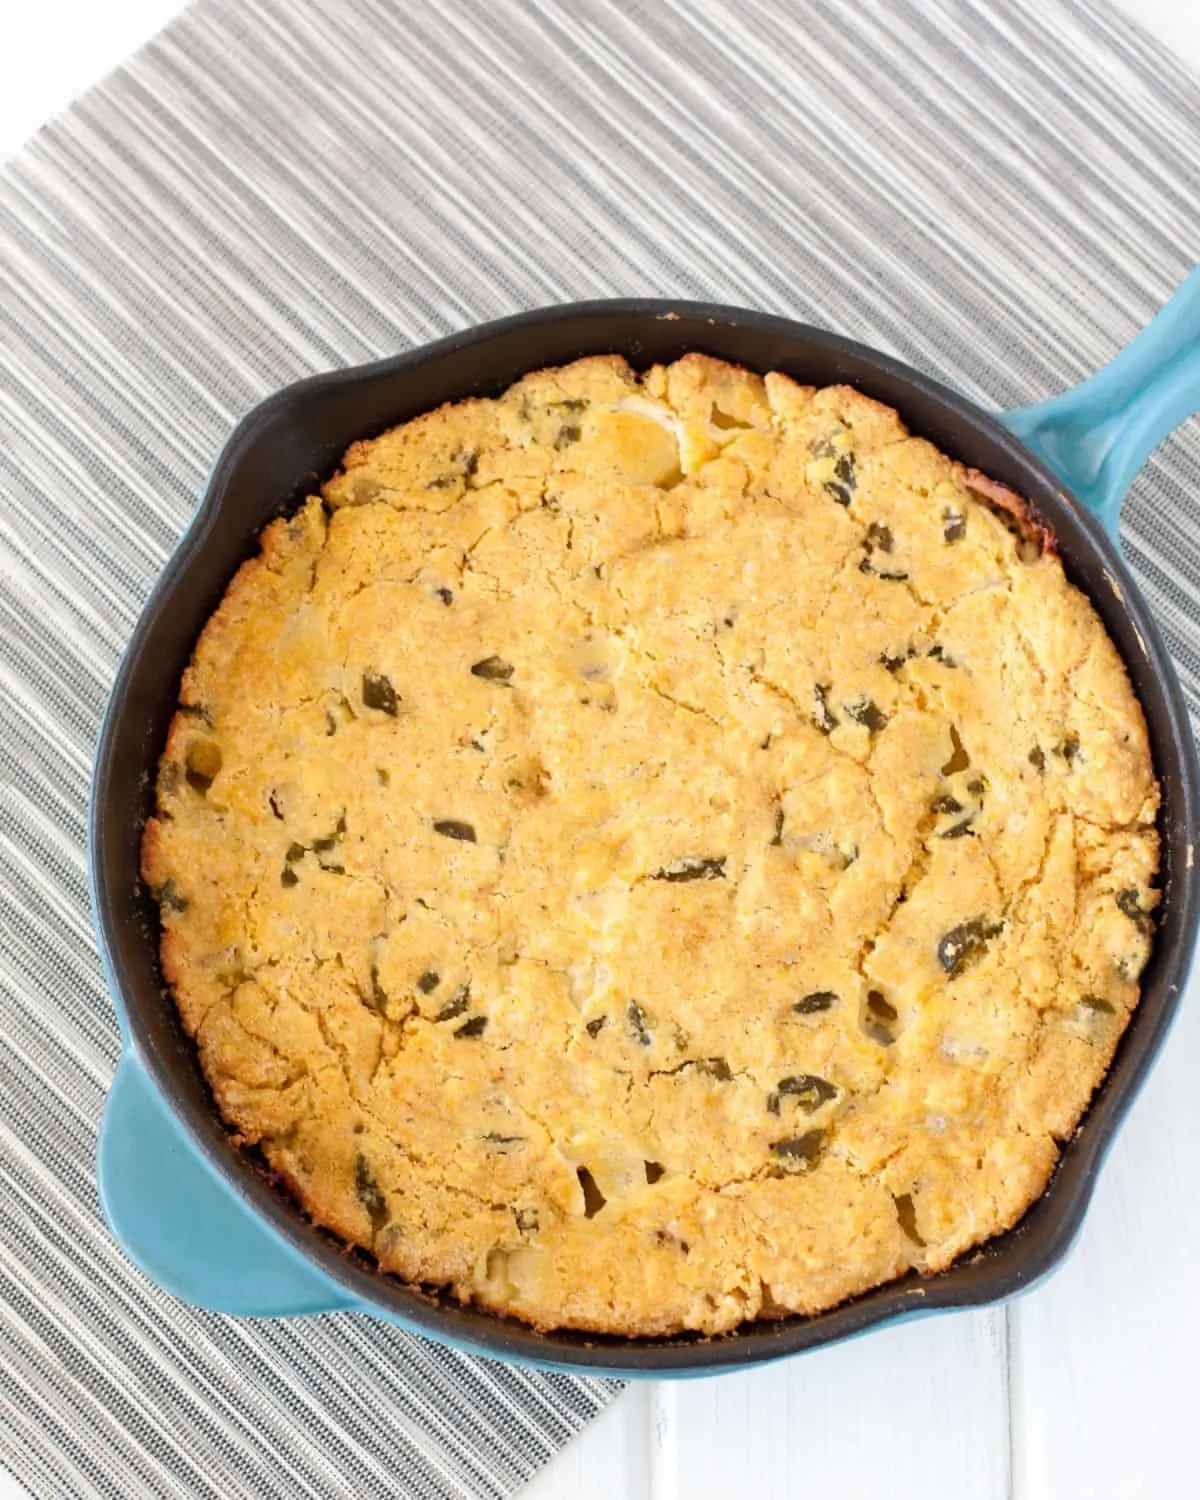 Smoked Cheddar Candied Jalapeno Cornbread - Spicy with a hint of sweet and cheesy... need I say more? Recipe on GoodieGodmother.com